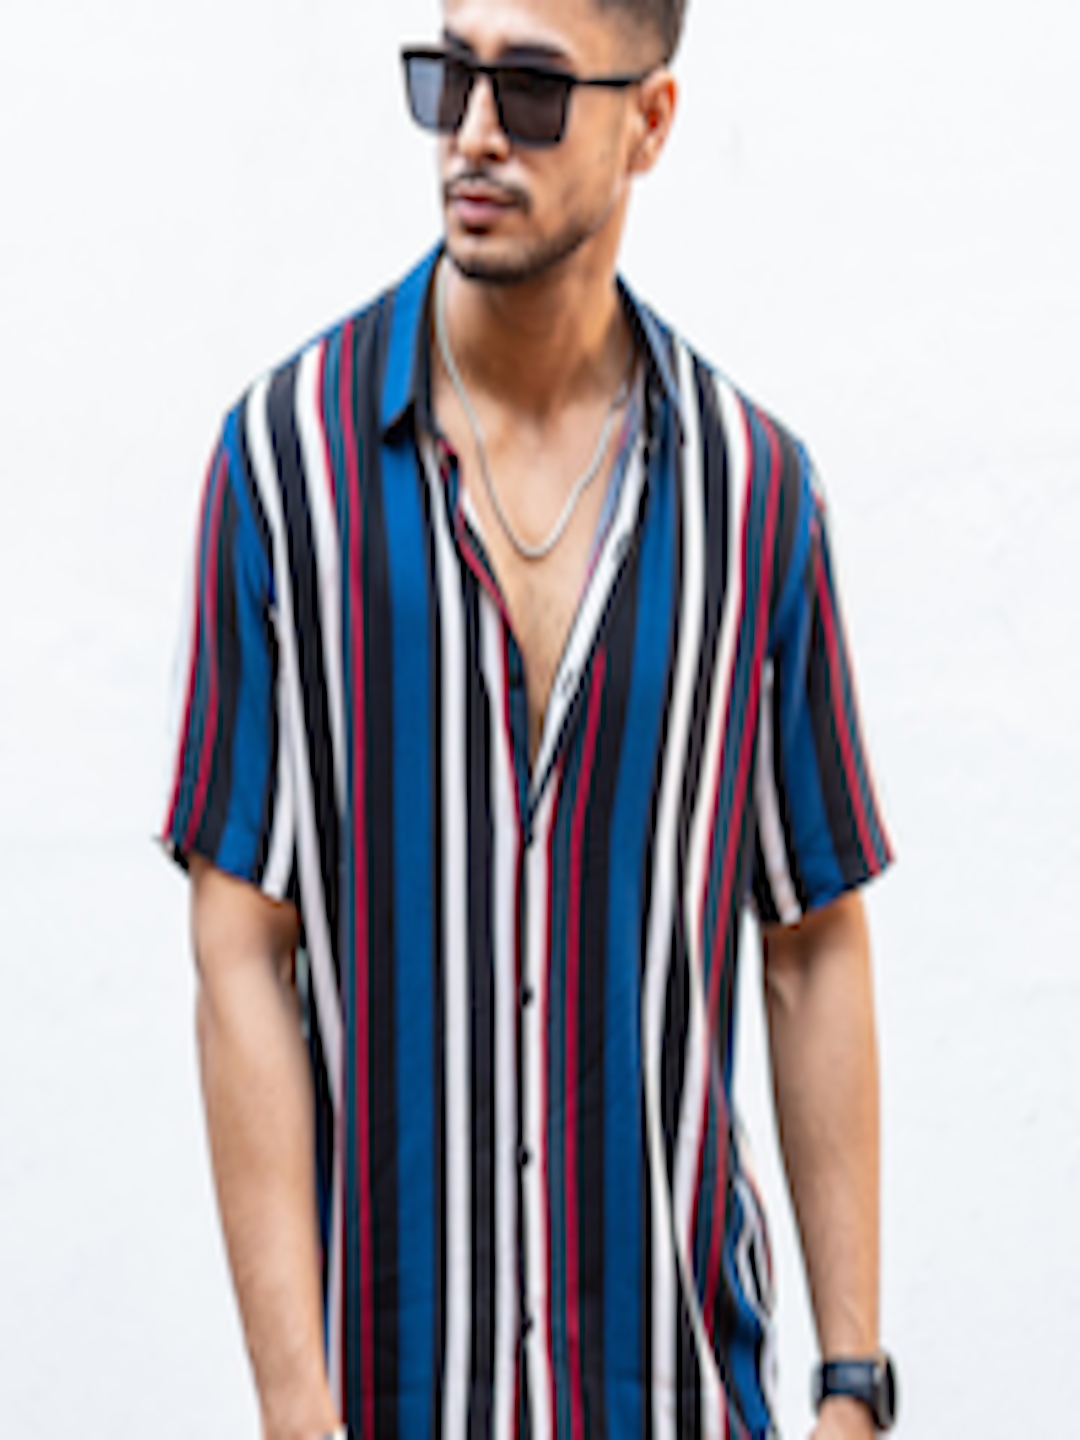 Buy Powerlook India Slim Vertical Multi Striped Knitted Casual Shirt ...